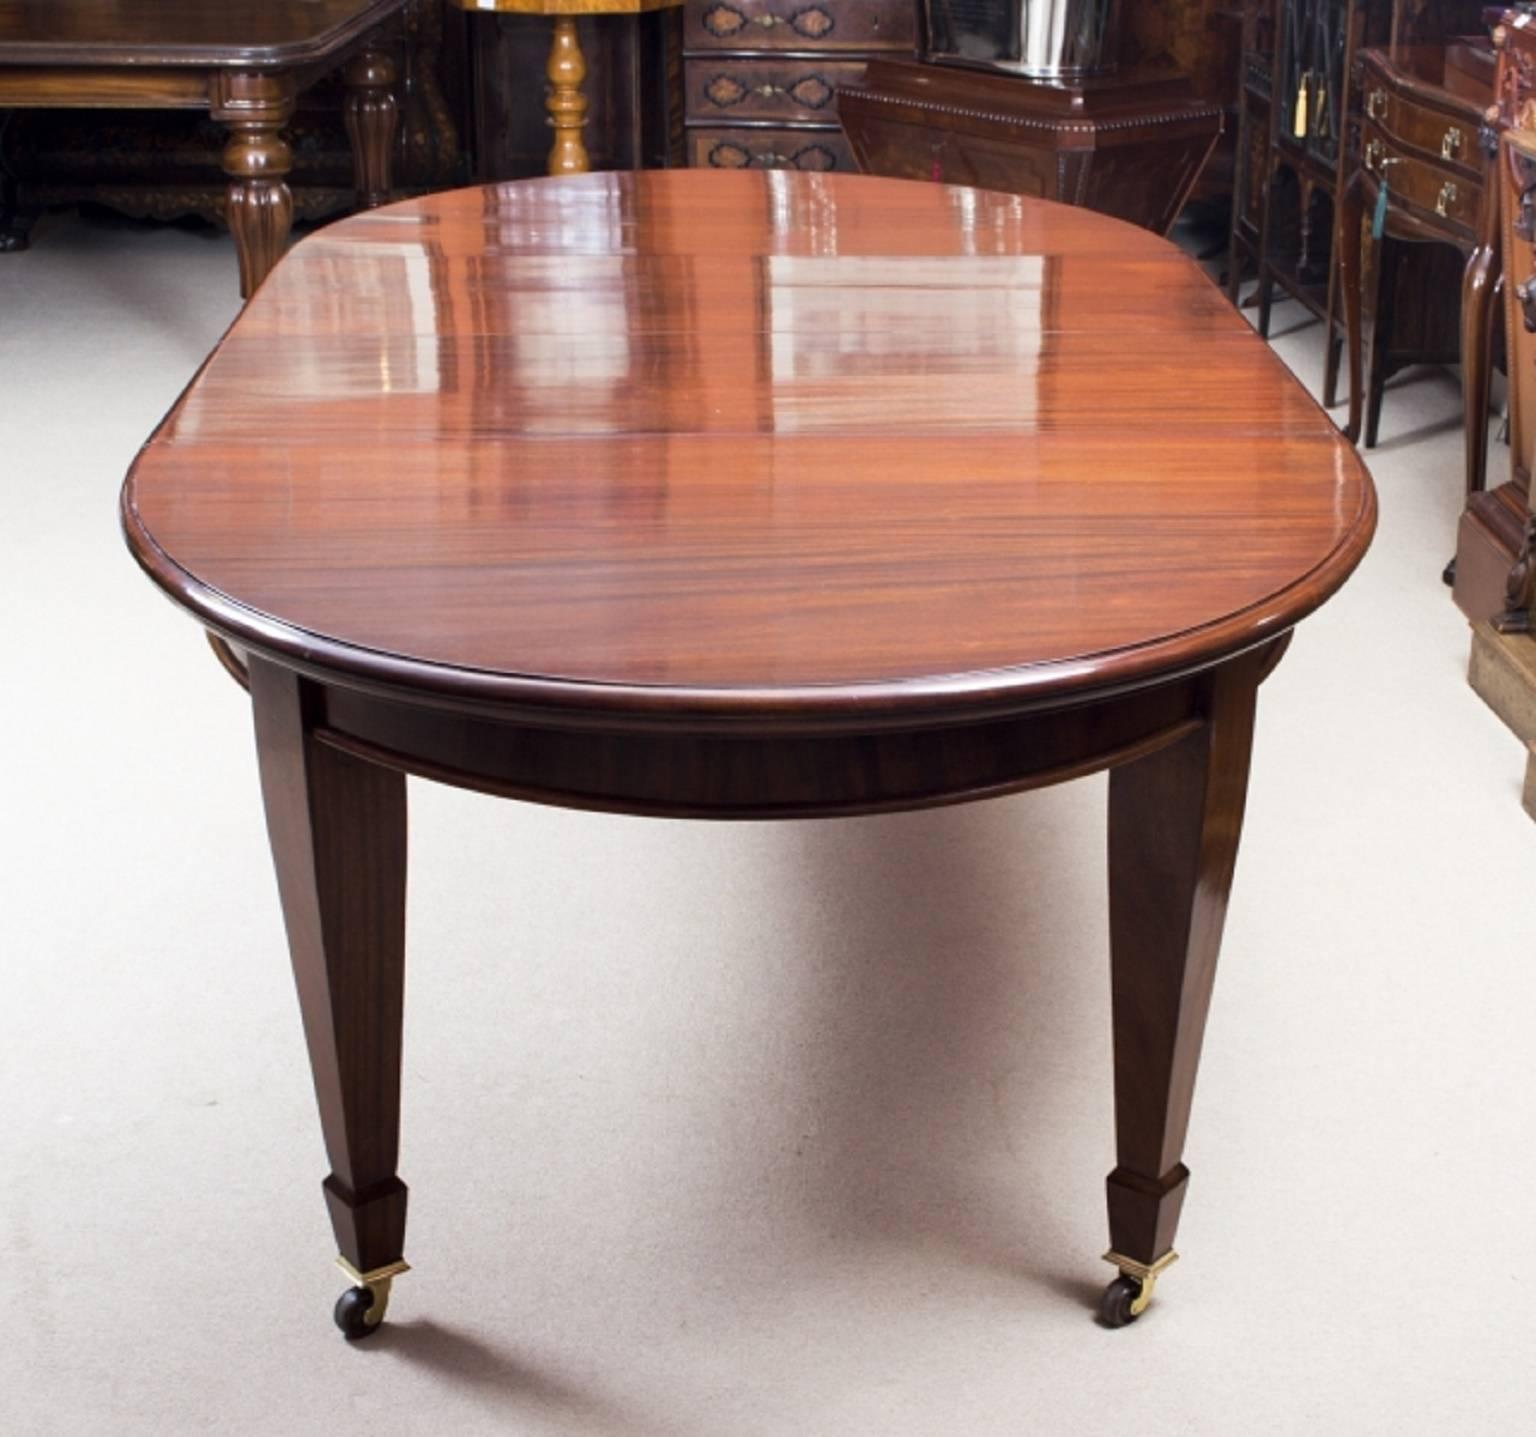 1900 dining table